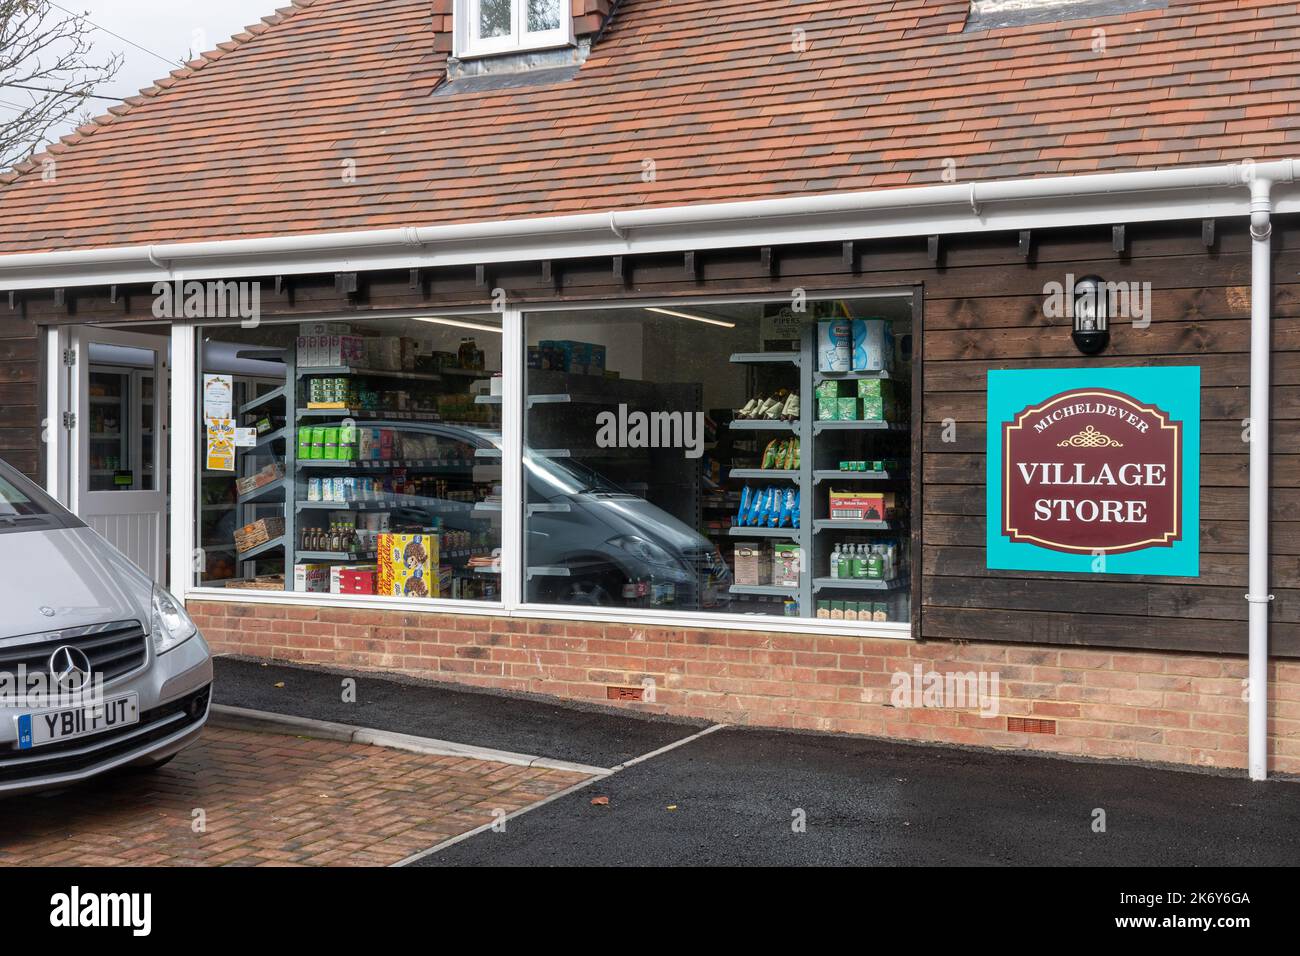 Micheldever village store, Hampshire, England, UK, small retail business servicing the local community Stock Photo